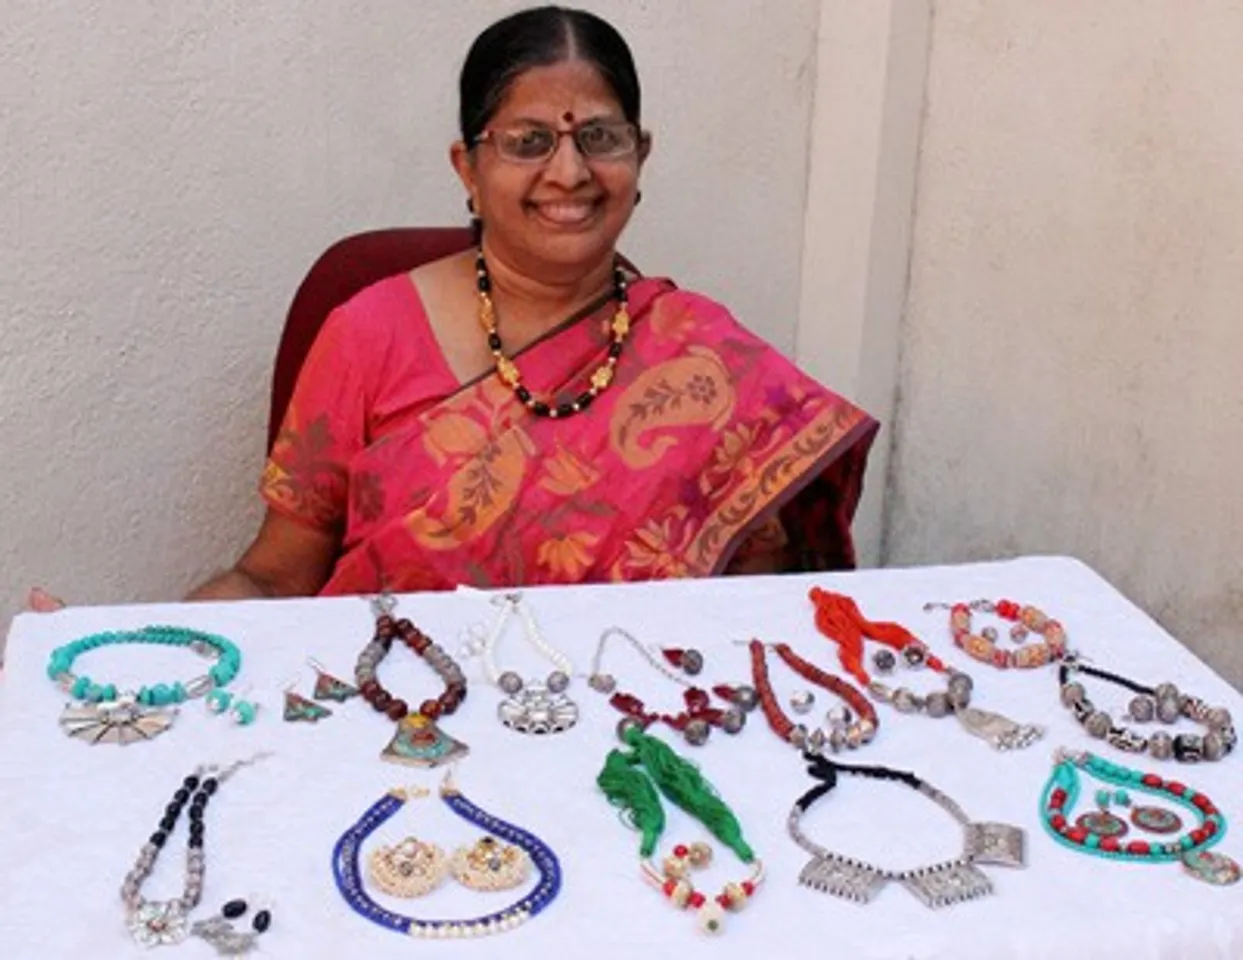 "Chitra's Jewel Art" Jewellery-business-Founder Chitra Manohar's Interview